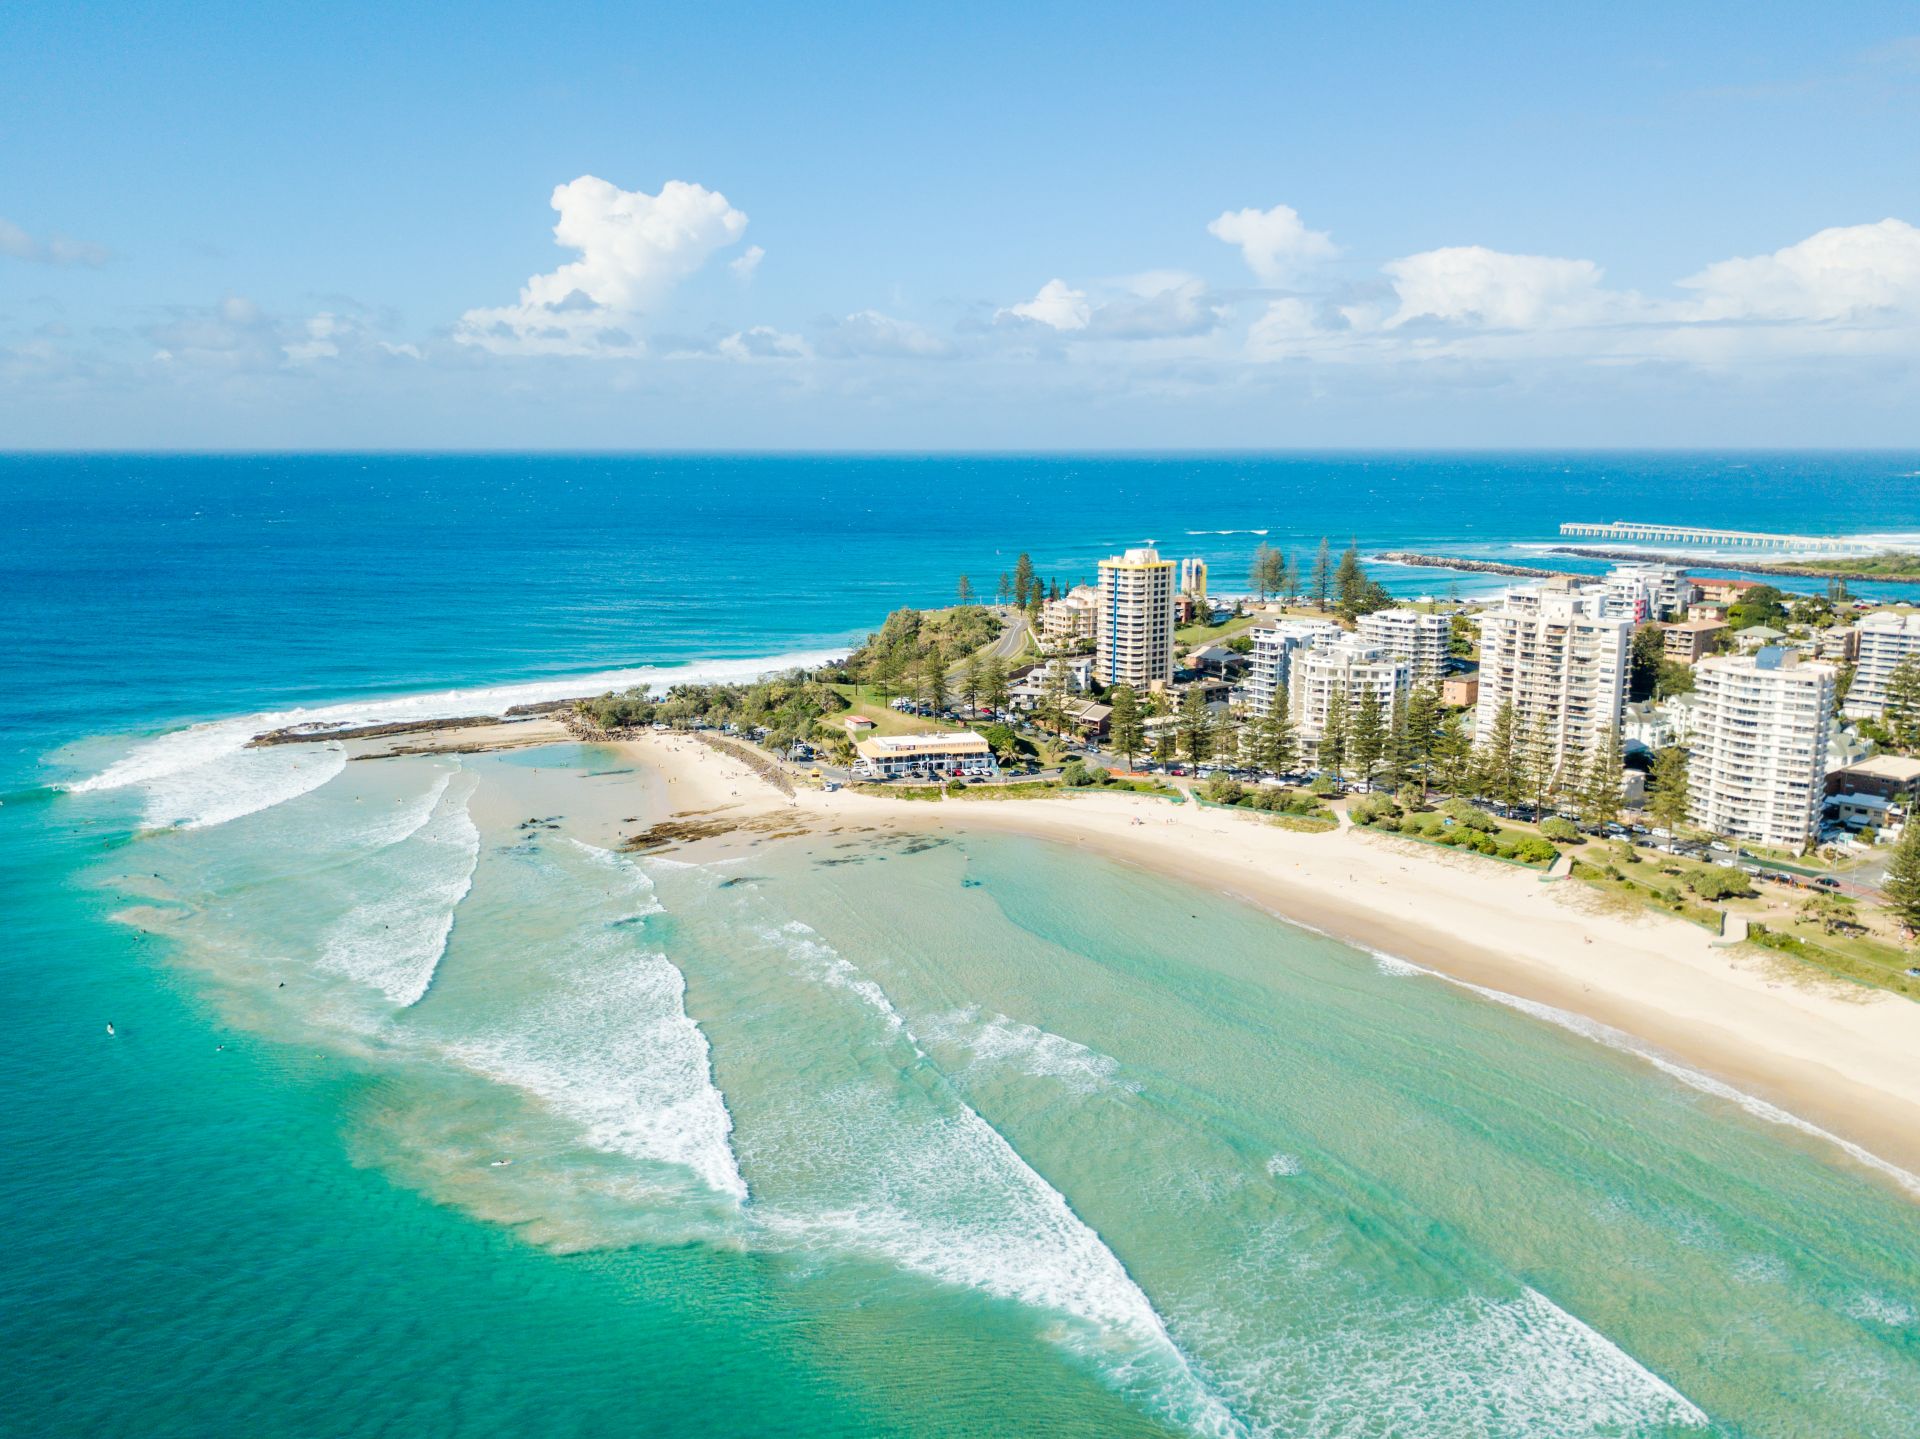 Coolangatta and Snapper Rocks from an aerial view